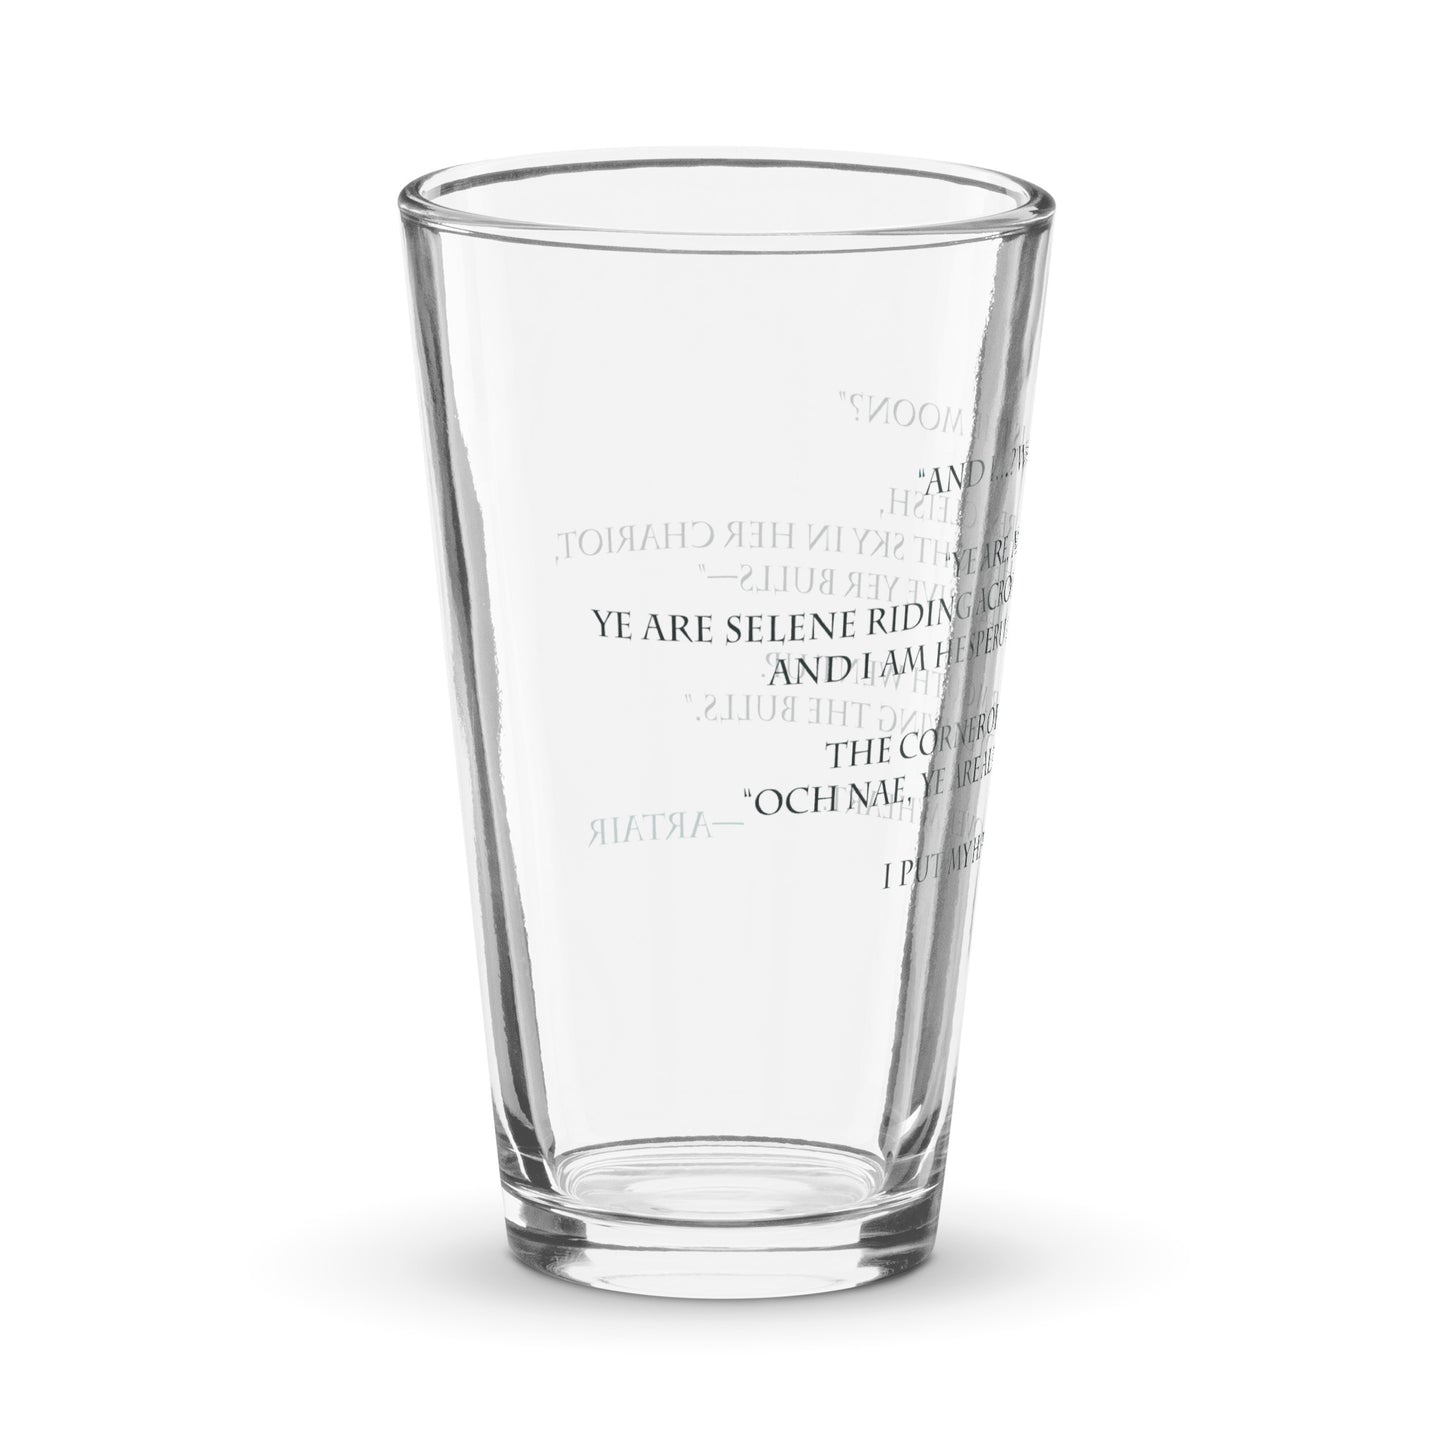 Selene and Hesperus quote from Artair and Gwynedd on shaker pint glass